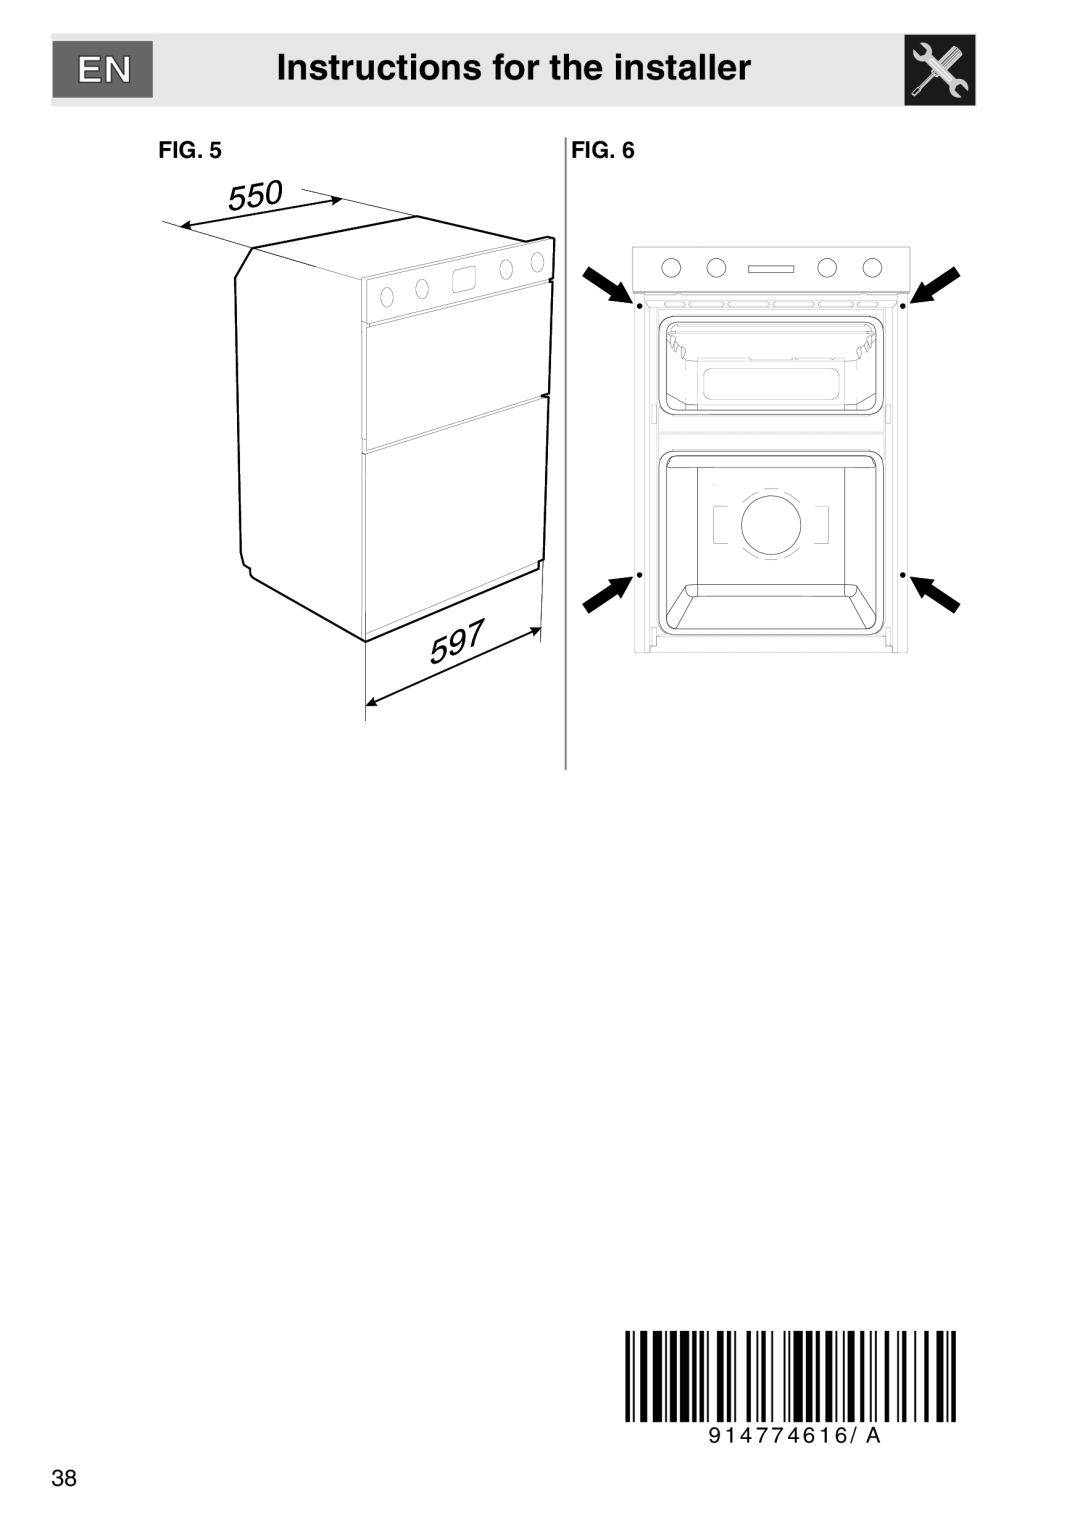 Smeg smeg Double Oven, DOSCA36X-8 installation instructions 550, Instructions for the installer, 9 1 4 7 7 4 6 1 6 / A 